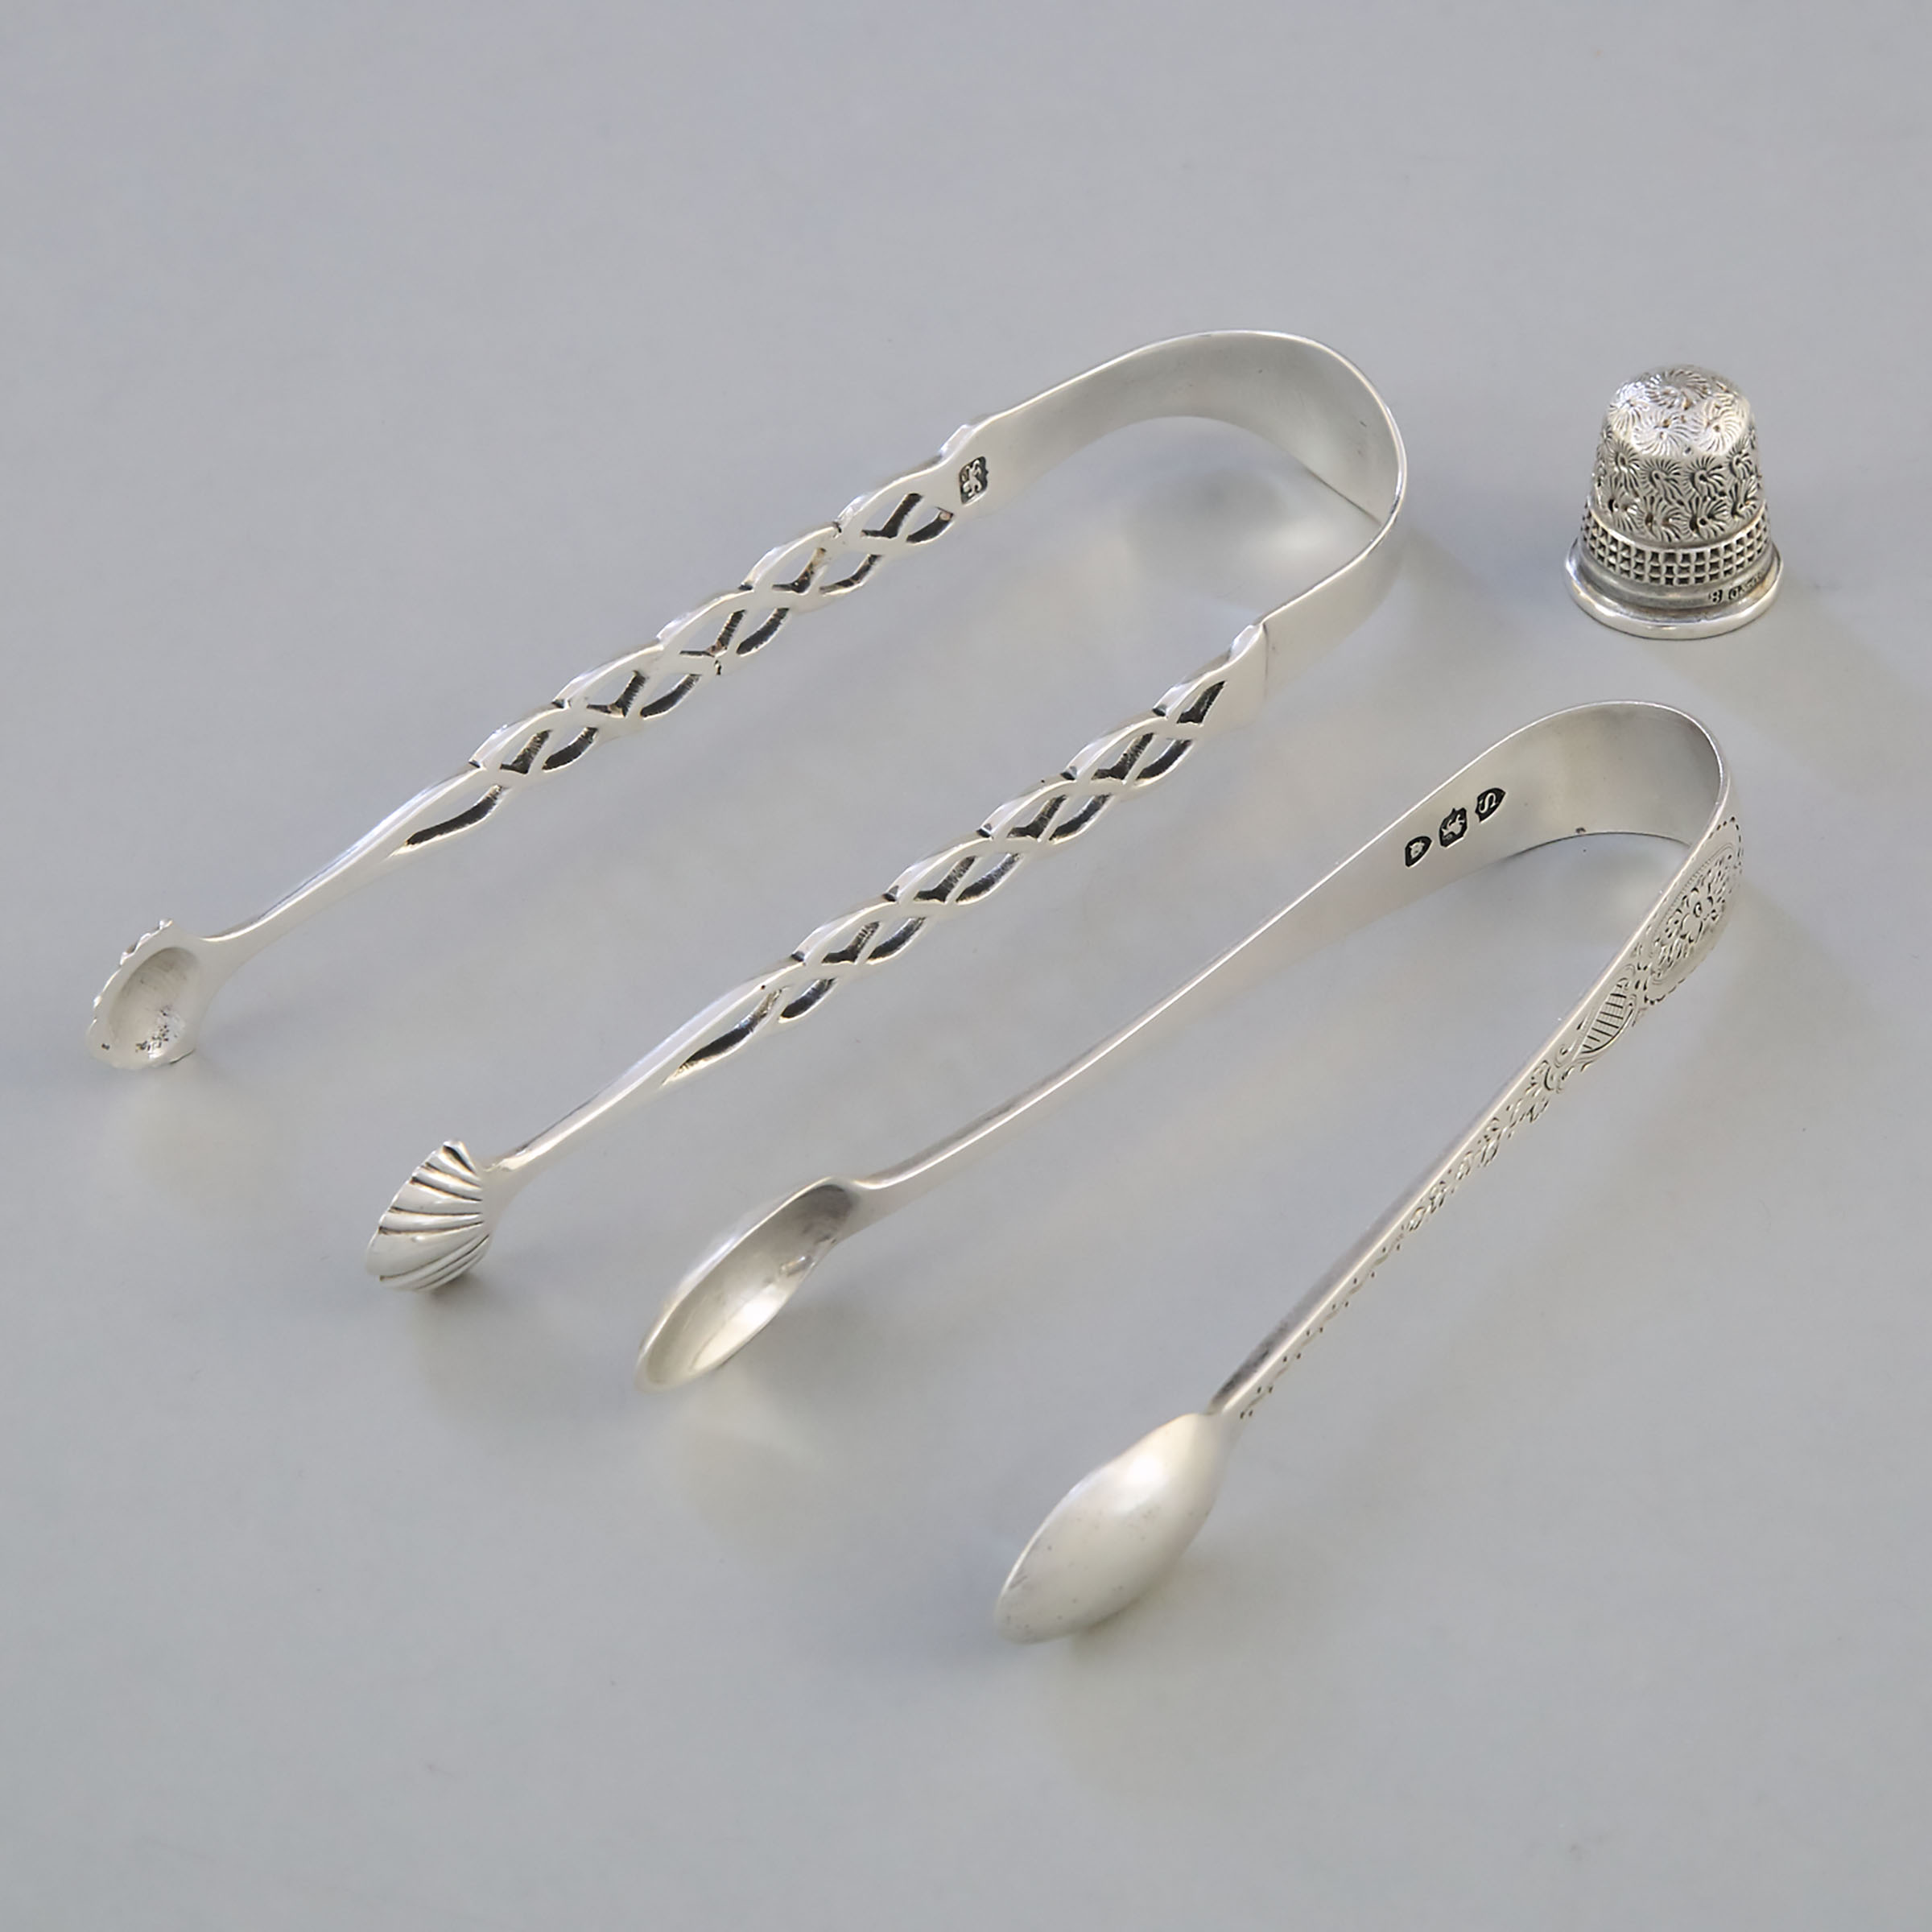 Two George III and Victorian Silver Sugar Tongs, London, c.1775/1893, and a Thimble, Chester, 1896